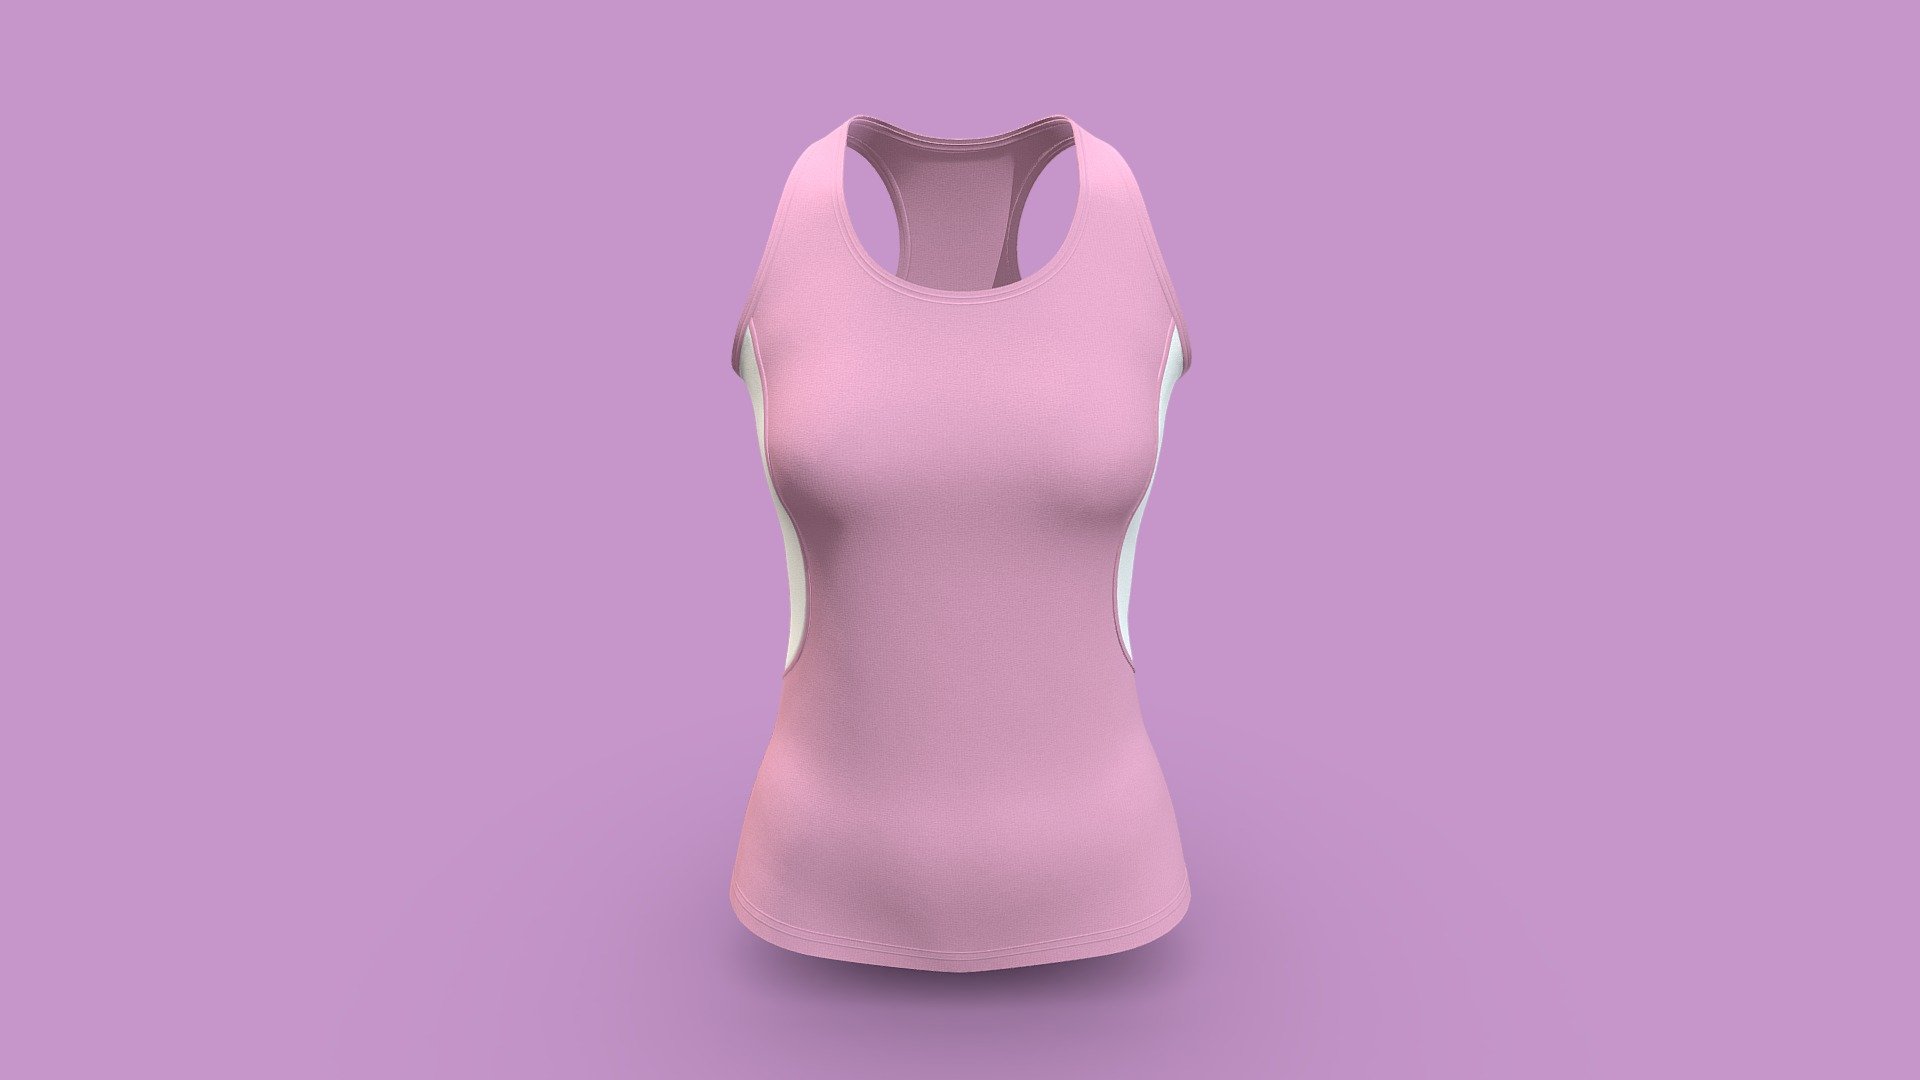 Cloth Title = Sporty Tank Top For Women Design 

SKU = DG100112 

Category = Women 

Product Type = Tank Top 

Cloth Length = Regular 

Body Fit = Regular Fit 

Occasion = Sportswear  


Our Services:

3D Apparel Design.

OBJ,FBX,GLTF Making with High/Low Poly.

Fabric Digitalization.

Mockup making.

3D Teck Pack.

Pattern Making.

2D Illustration.

Cloth Animation and 360 Spin Video.


Contact us:- 

Email: info@digitalfashionwear.com 

Website: https://digitalfashionwear.com 

WhatsApp No: +8801759350445 


We designed all the types of cloth specially focused on product visualization, e-commerce, fitting, and production. 

We will design: 

T-shirts 

Polo shirts 

Hoodies 

Sweatshirt 

Jackets 

Shirts 

TankTops 

Trousers 

Bras 

Underwear 

Blazer 

Aprons 

Leggings 

and All Fashion items. 





Our goal is to make sure what we provide you, meets your demand 3d model